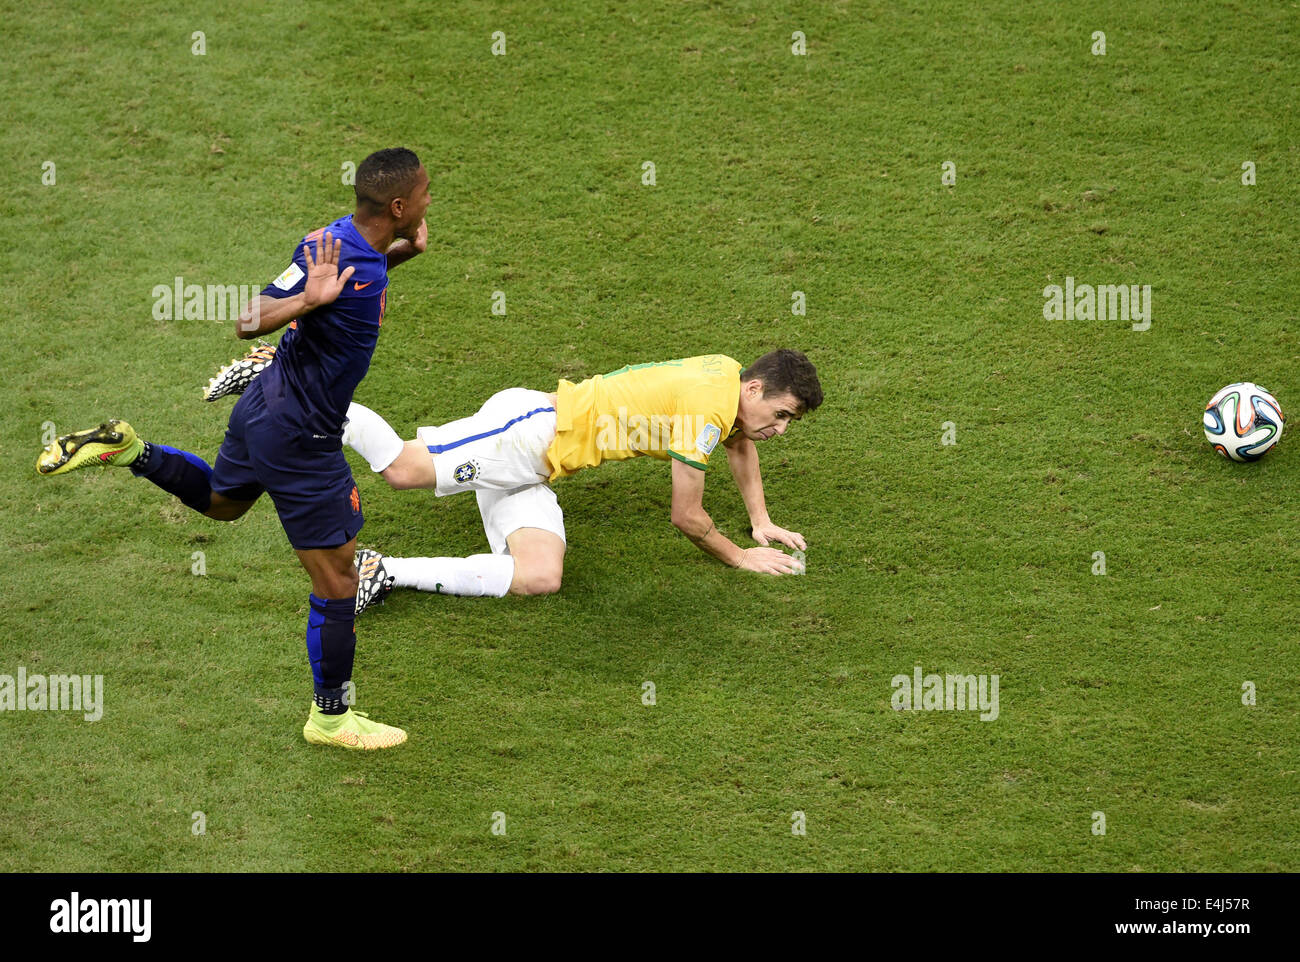 Brasilia, Brazil. 12th July, 2014. Brazil's Oscar (R) falls as vying with Netherlands' Jonathan De Guzman during the third place play-off match between Brazil and Netherlands of 2014 FIFA World Cup at the Estadio Nacional Stadium in Brasilia, Brazil, on July 12, 2014. Credit:  Lui Siu Wai/Xinhua/Alamy Live News Stock Photo